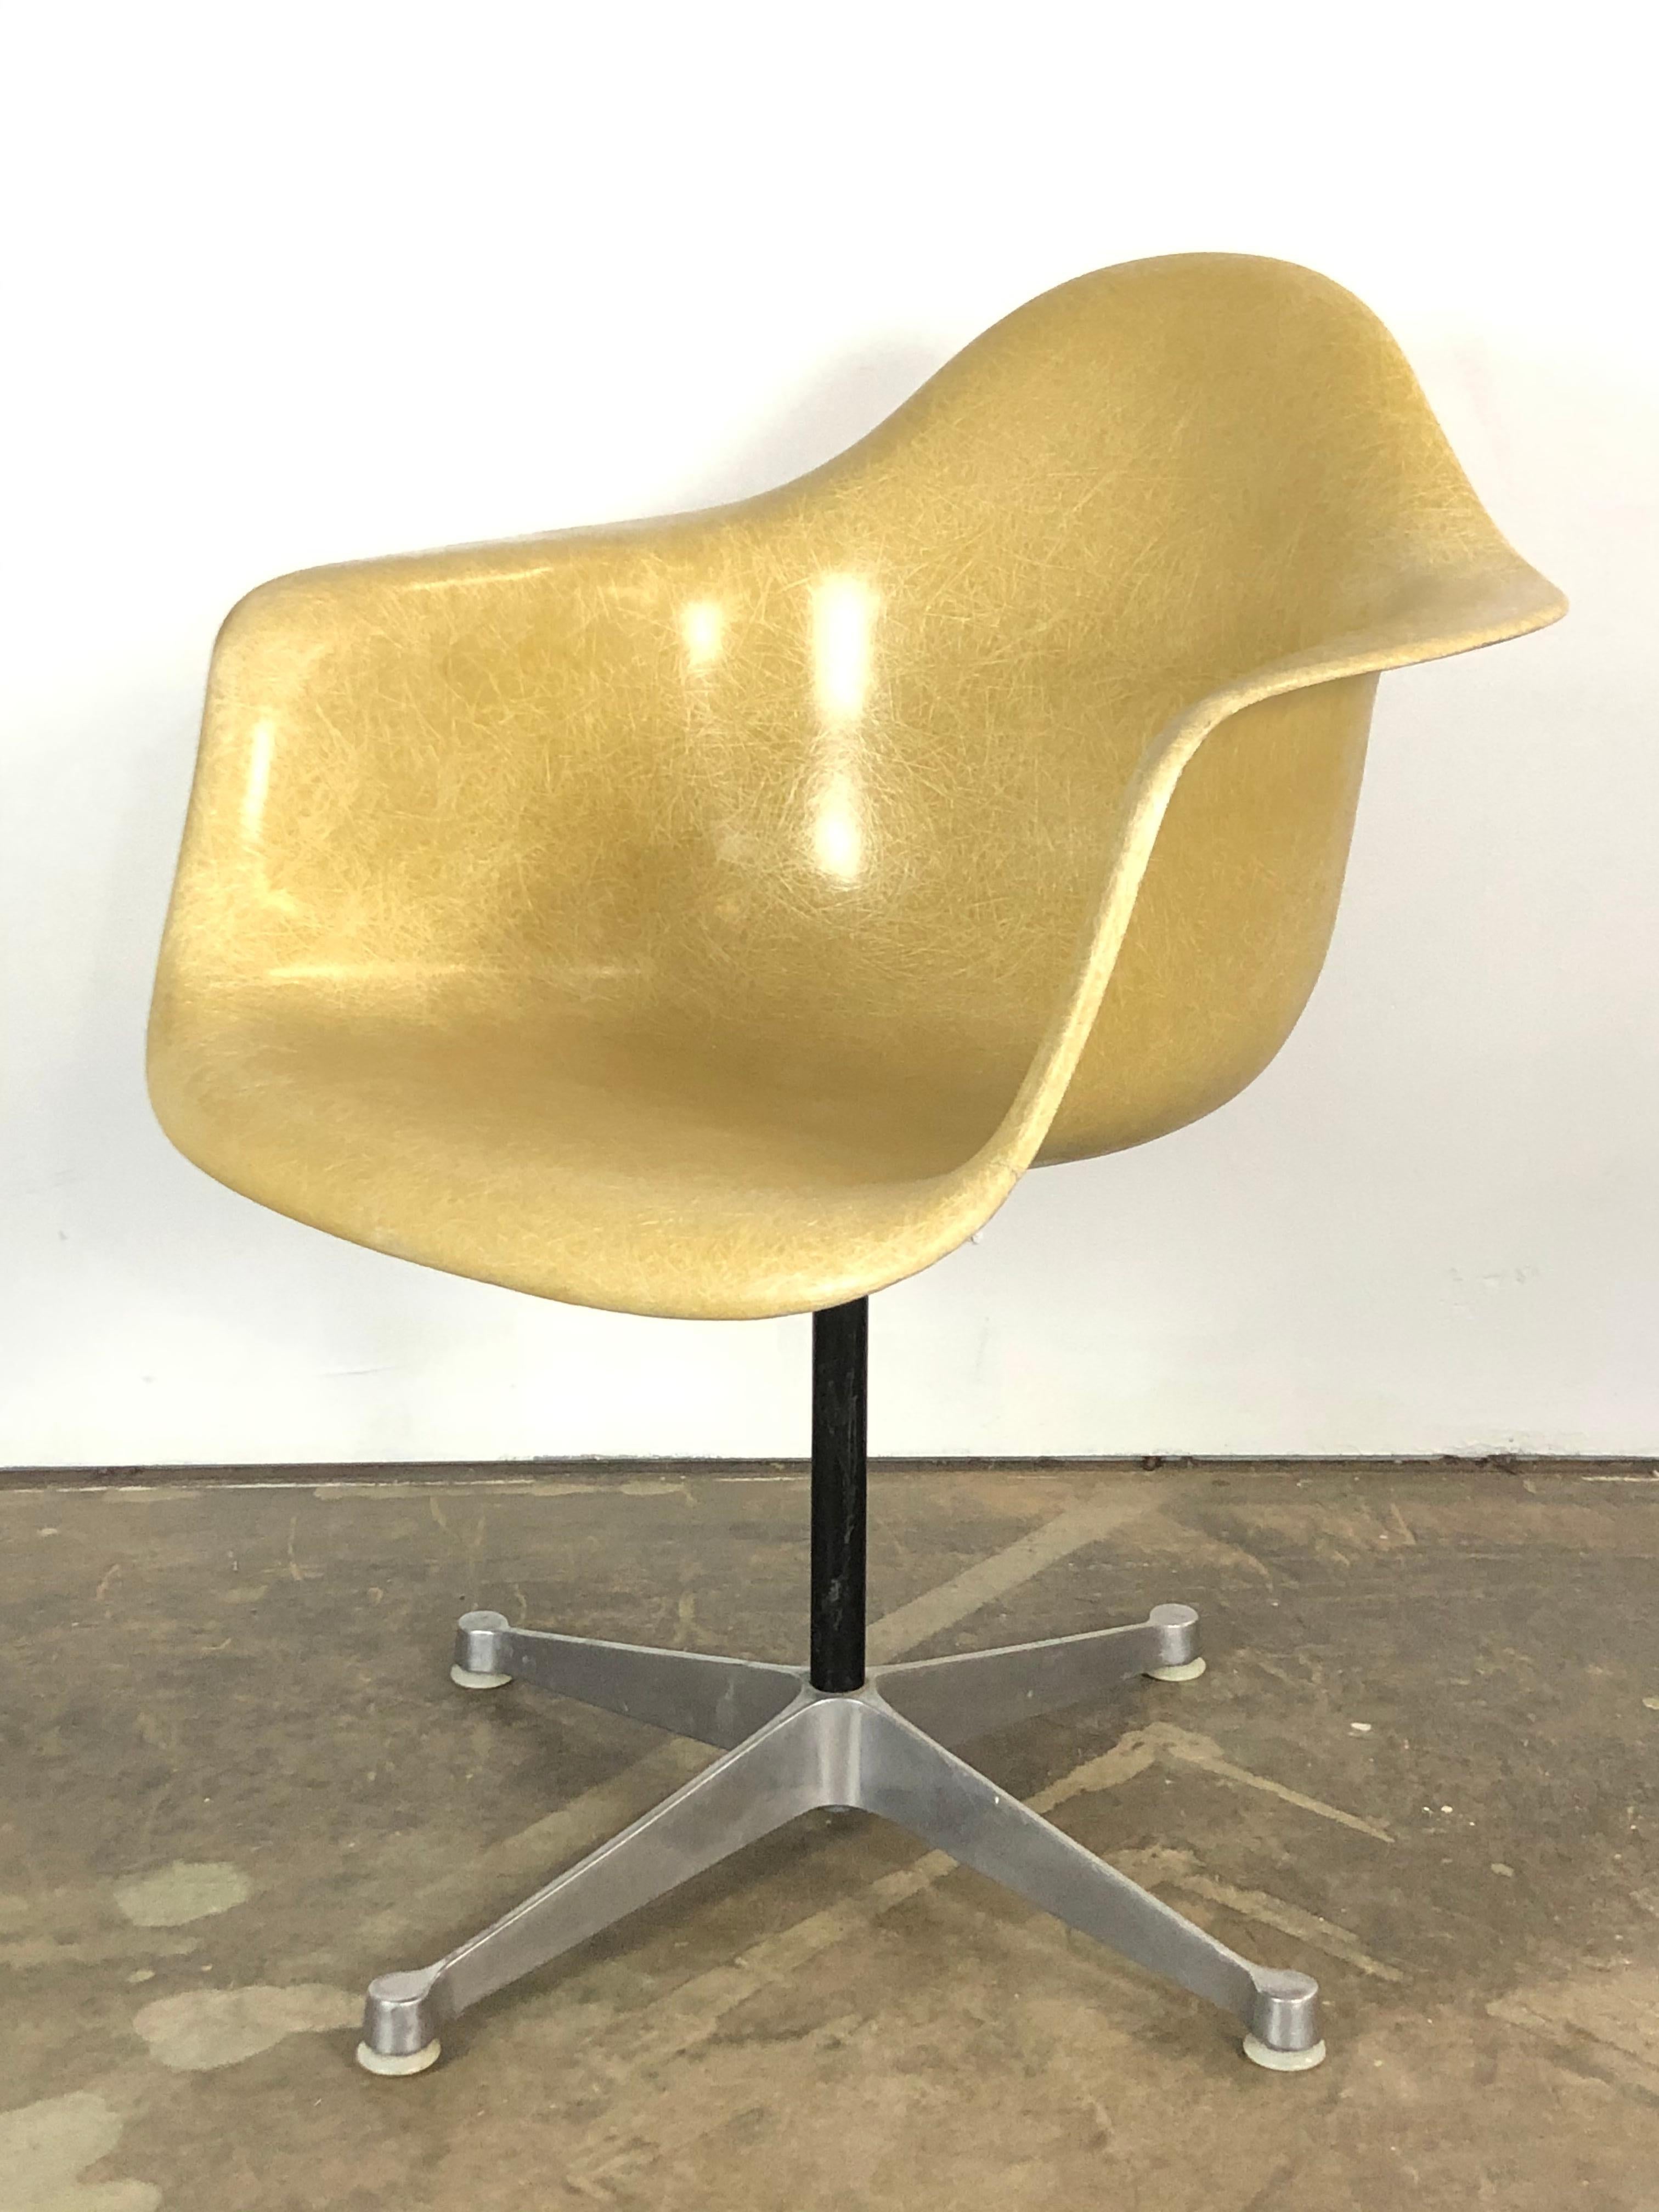 Classic example of the iconic Eames fiberglass armchair. Model PSC in Ochre light. Aluminum base swivels smoothly and retains all 4 nylon floor glides for use on multiple surfaces. In good condition with expected wear from age and use.